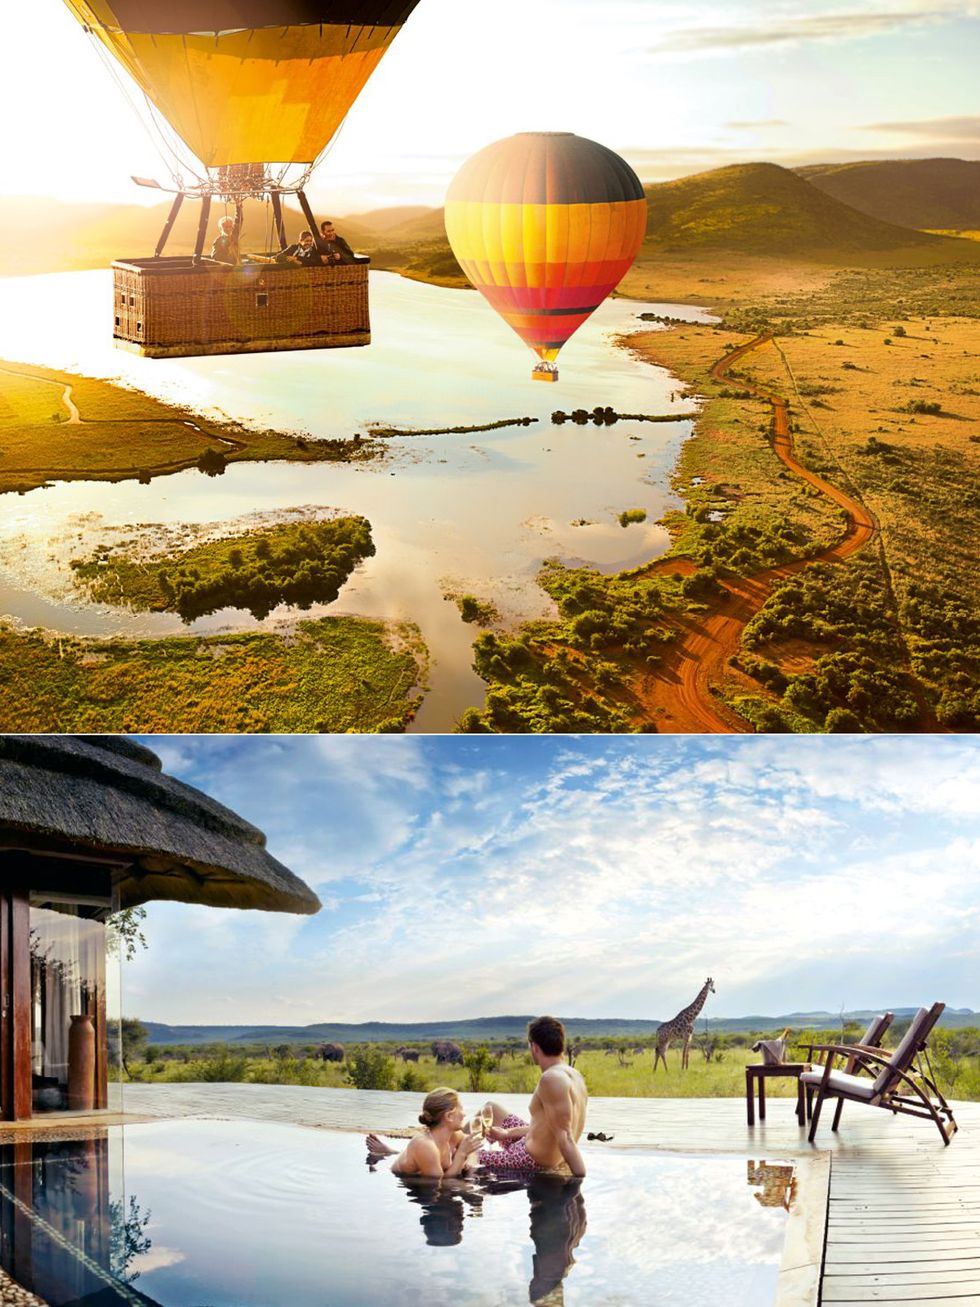 Yellow, Hot air ballooning, Tourism, Aerostat, Landscape, Leisure, Atmosphere, Balloon, People in nature, Summer, 